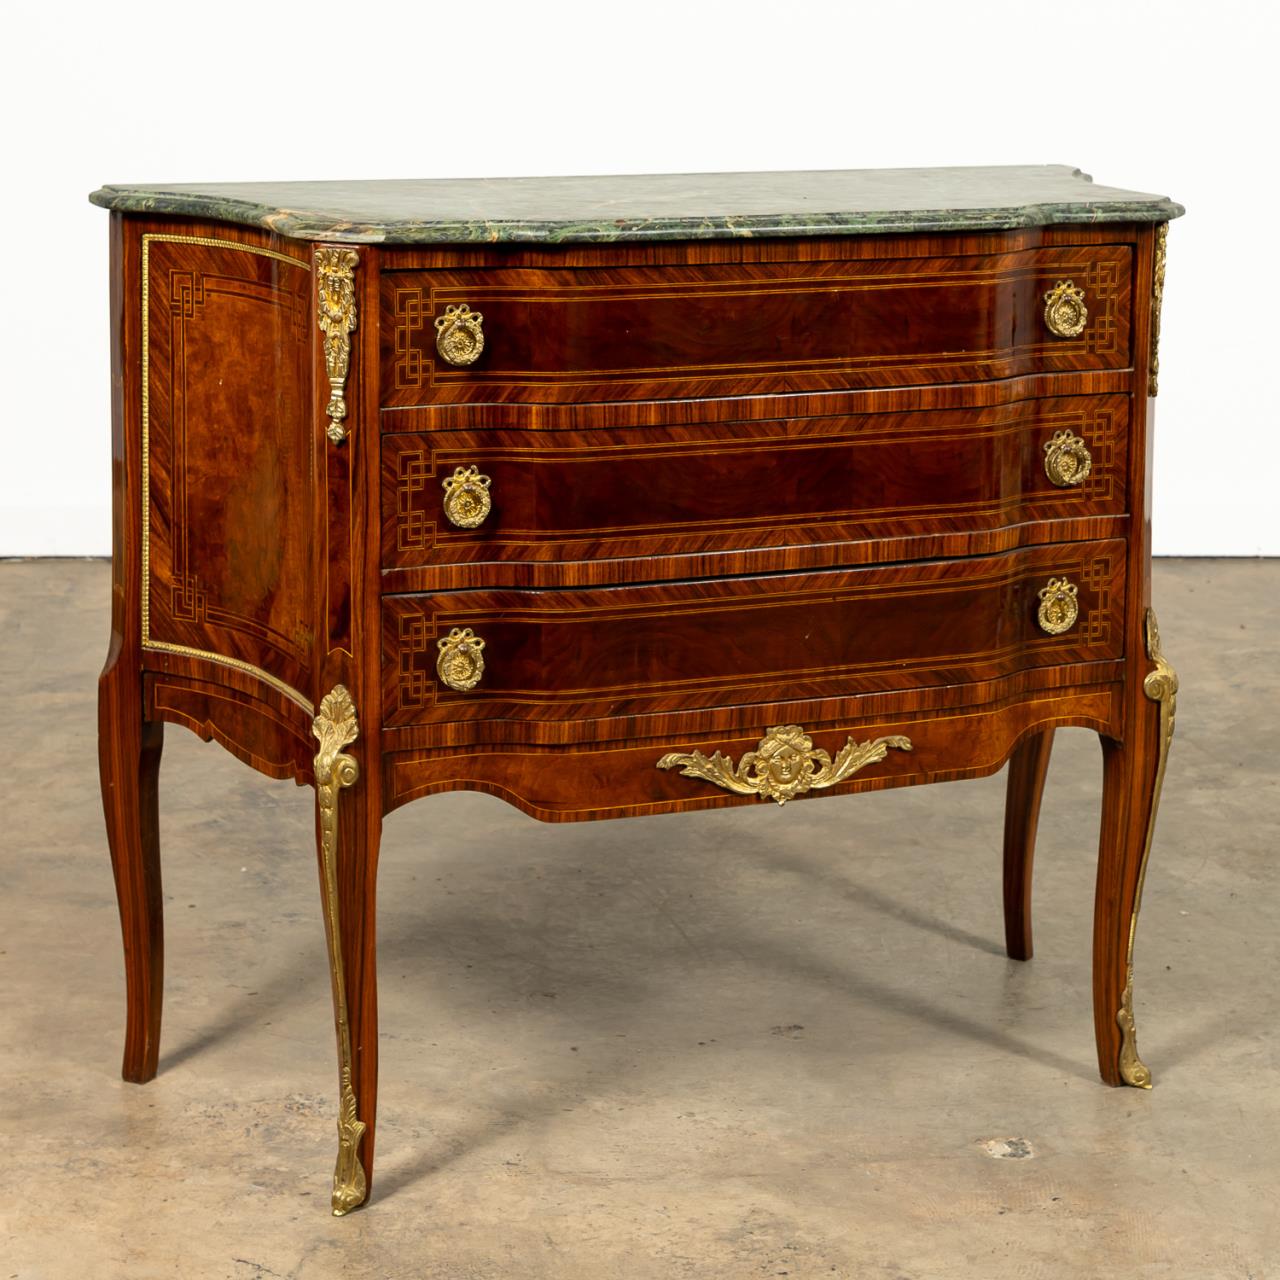 LOUIS XV-STYLE MARBLE TOP THREE-DRAWER